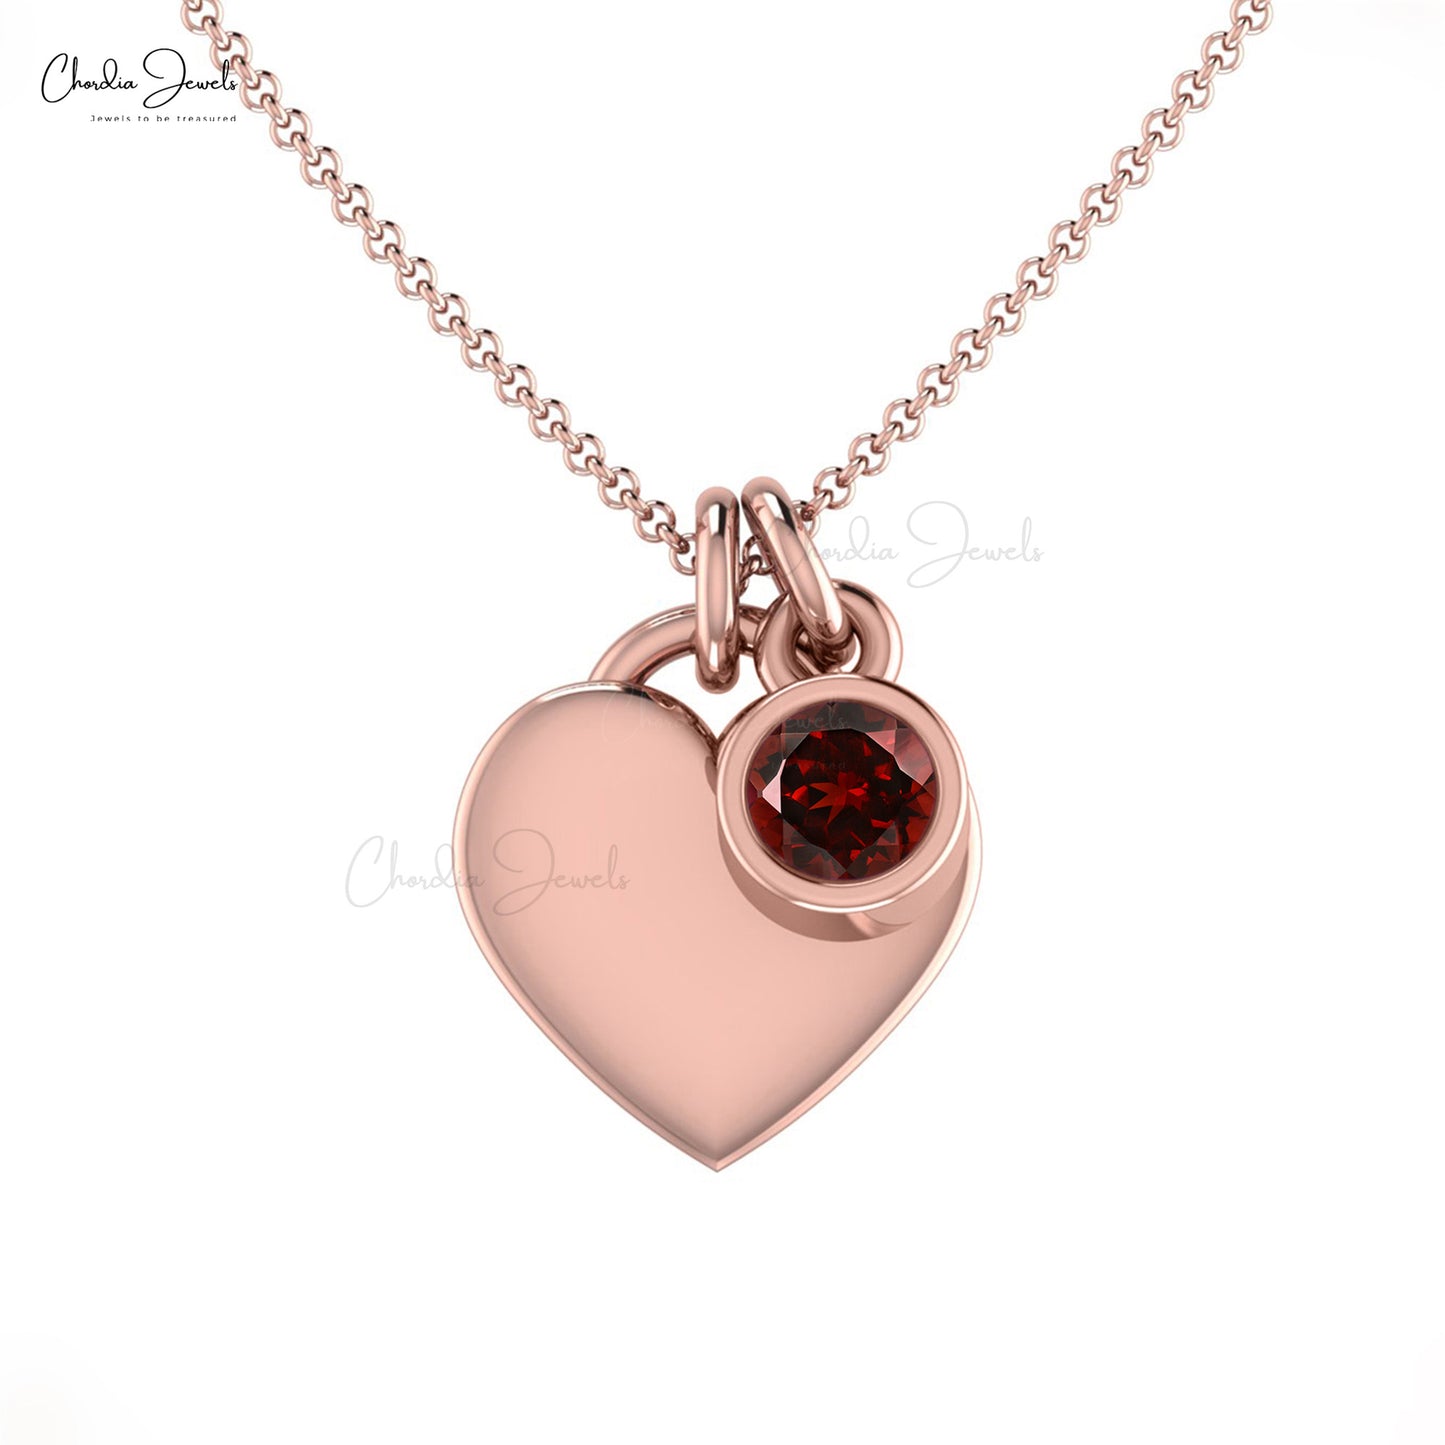 Natural Garnet Heart Charm Necklace In 14k Solid Gold